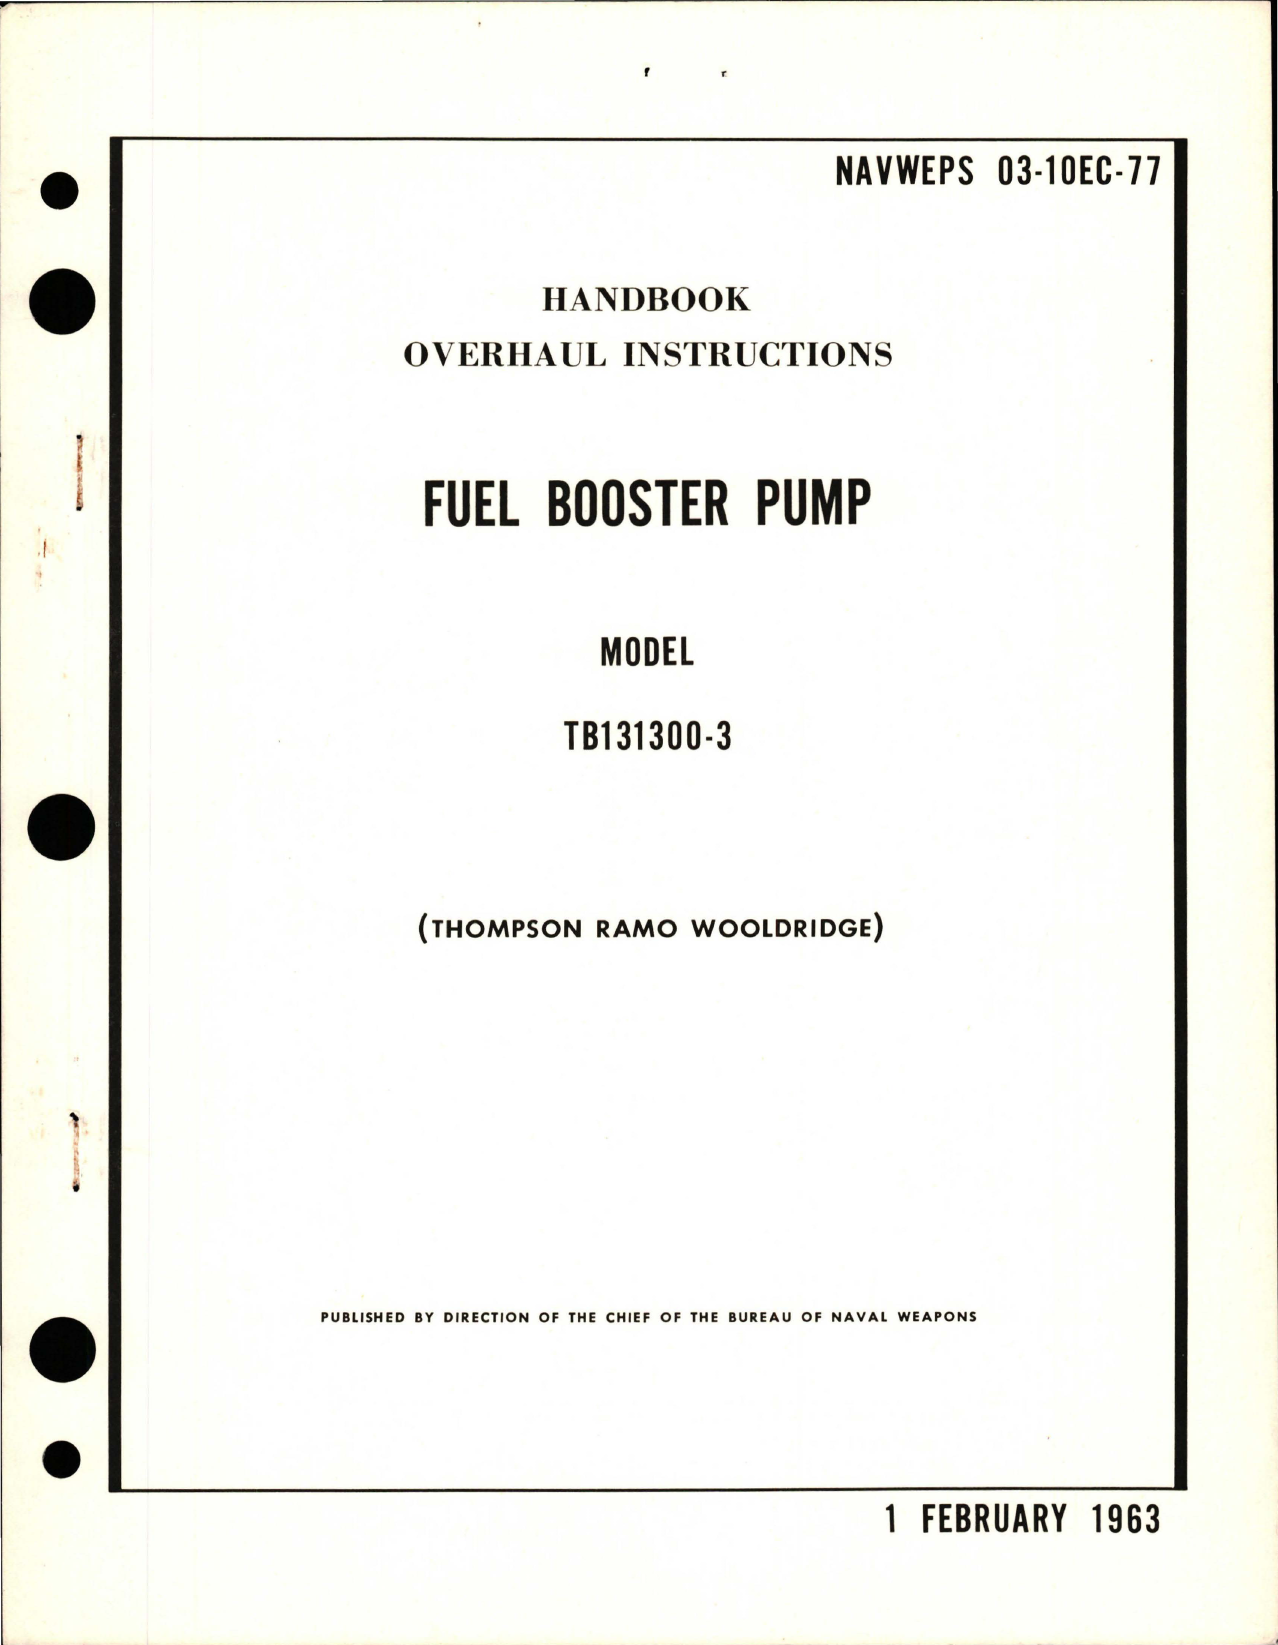 Sample page 1 from AirCorps Library document: Overhaul Instructions for Fuel Booster Pump - Models TB131300-3 